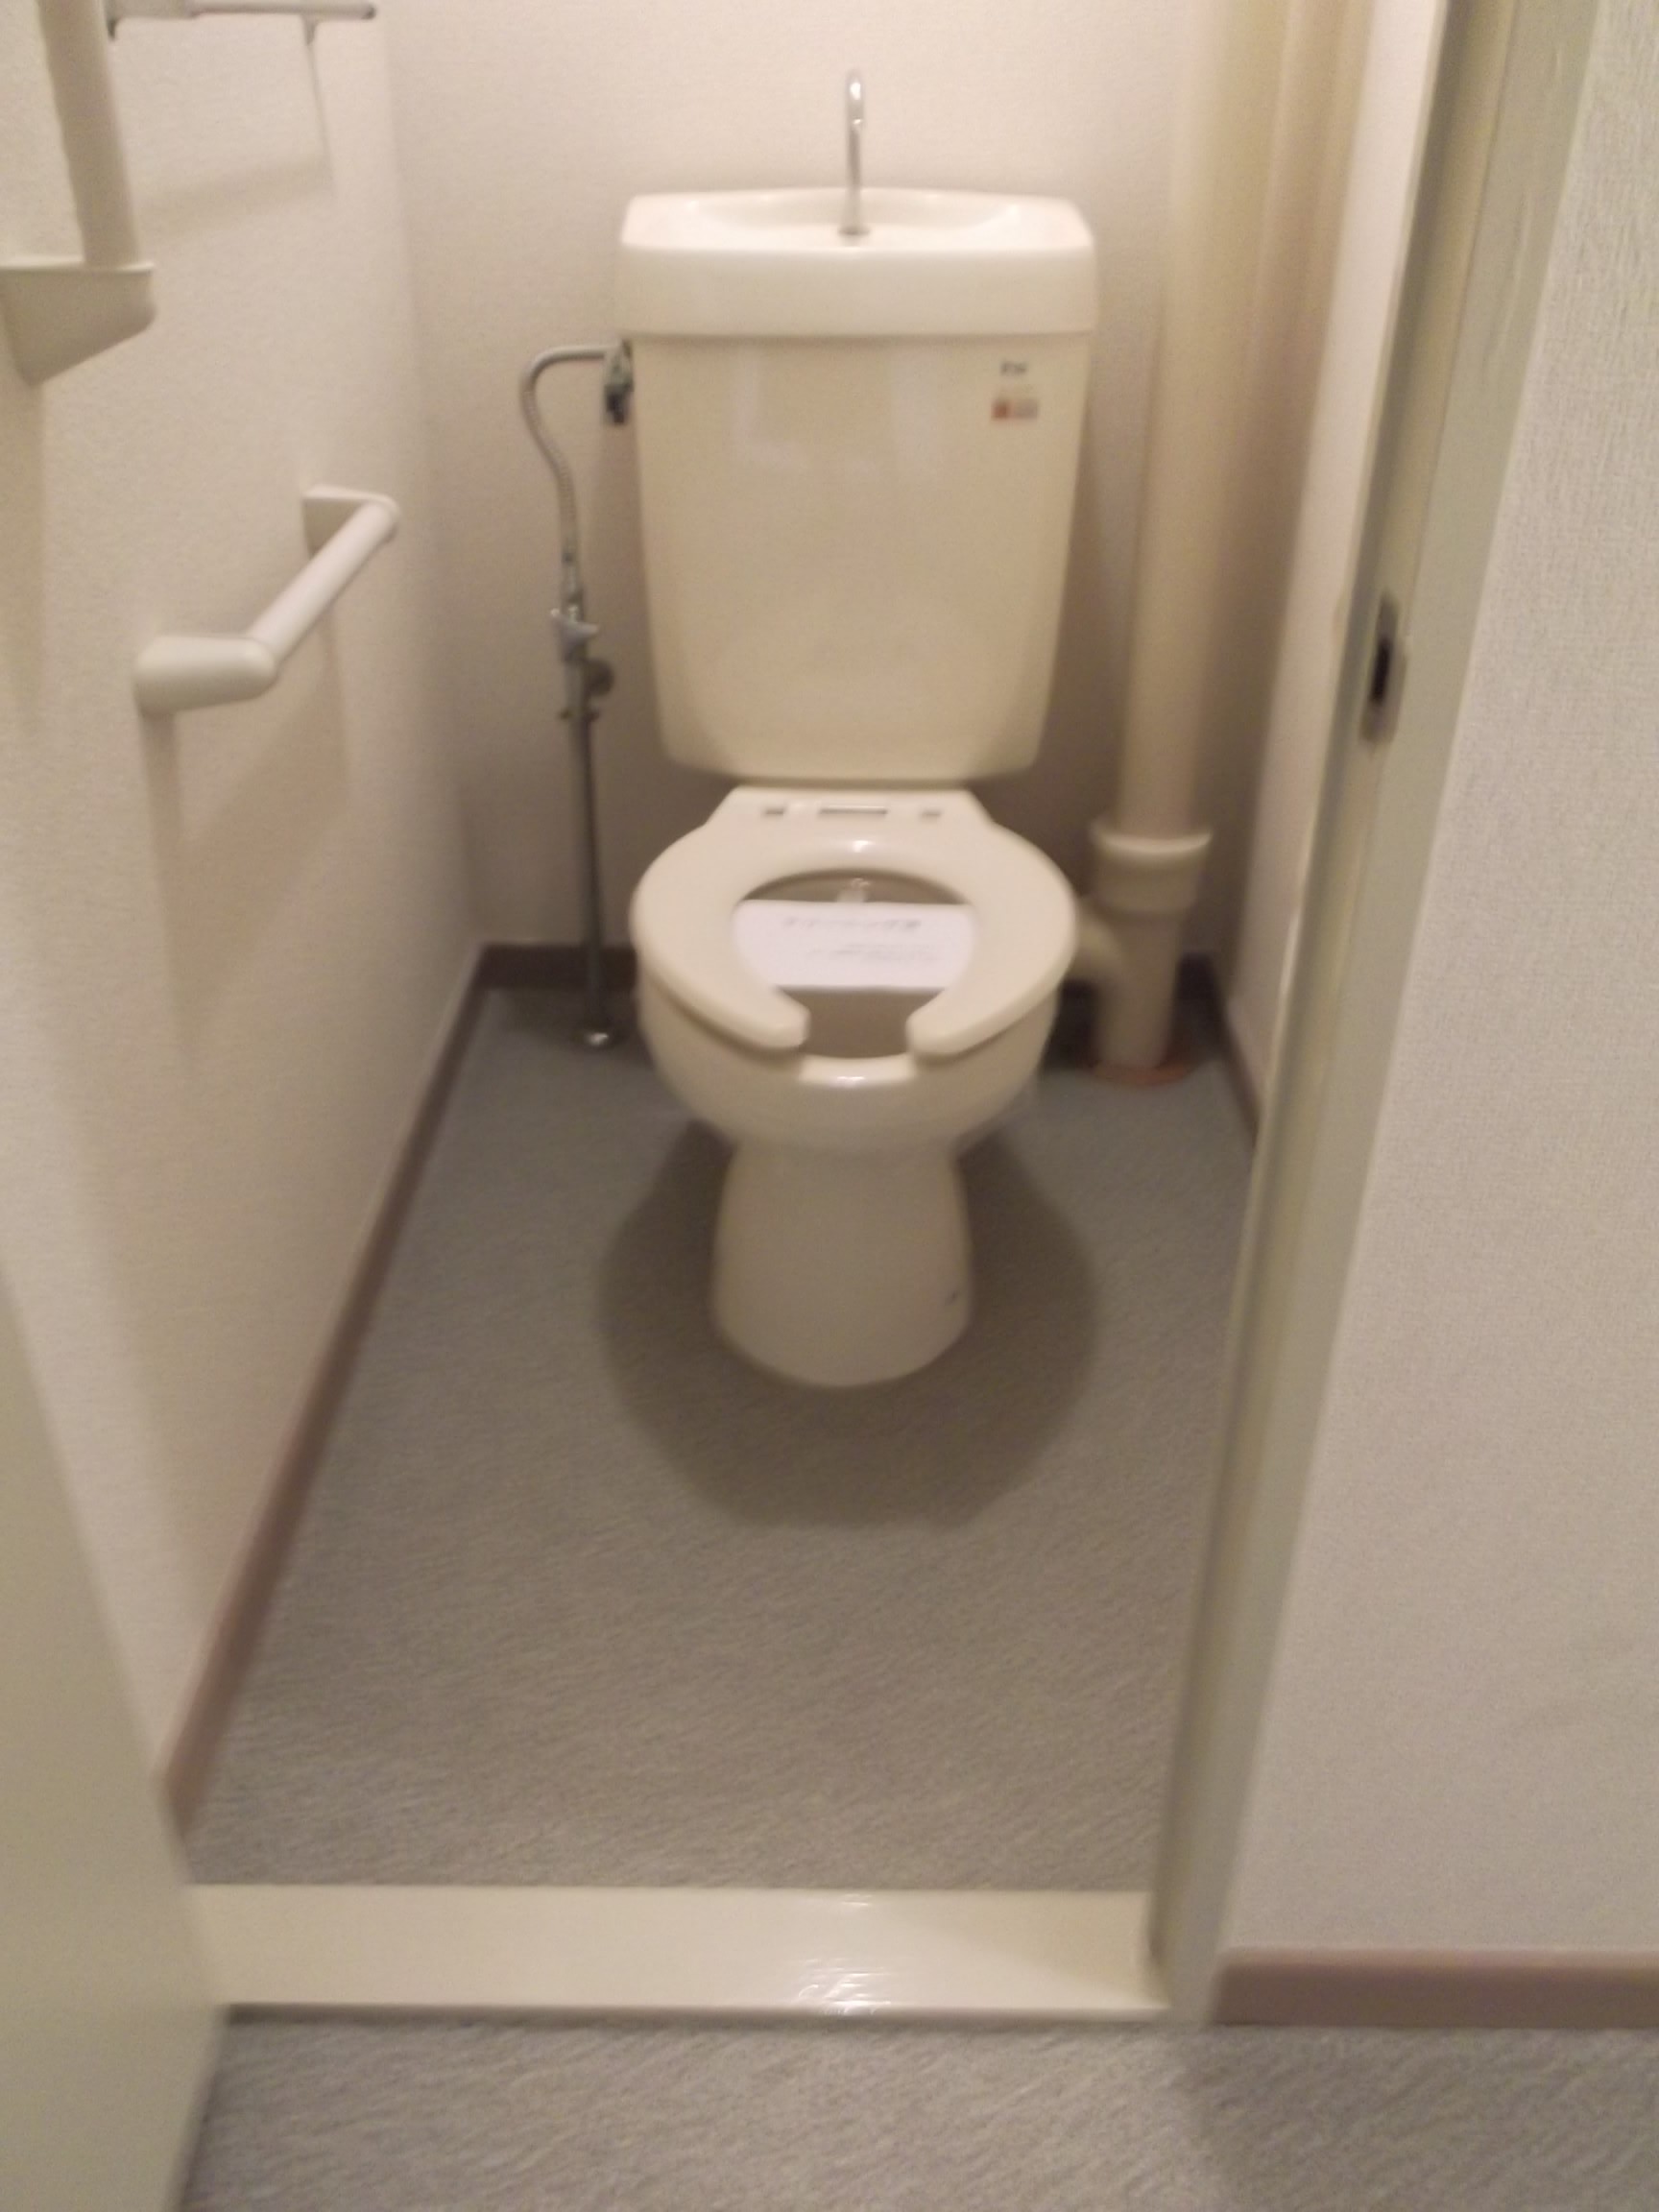 Toilet. Indoor photos posted of the same type